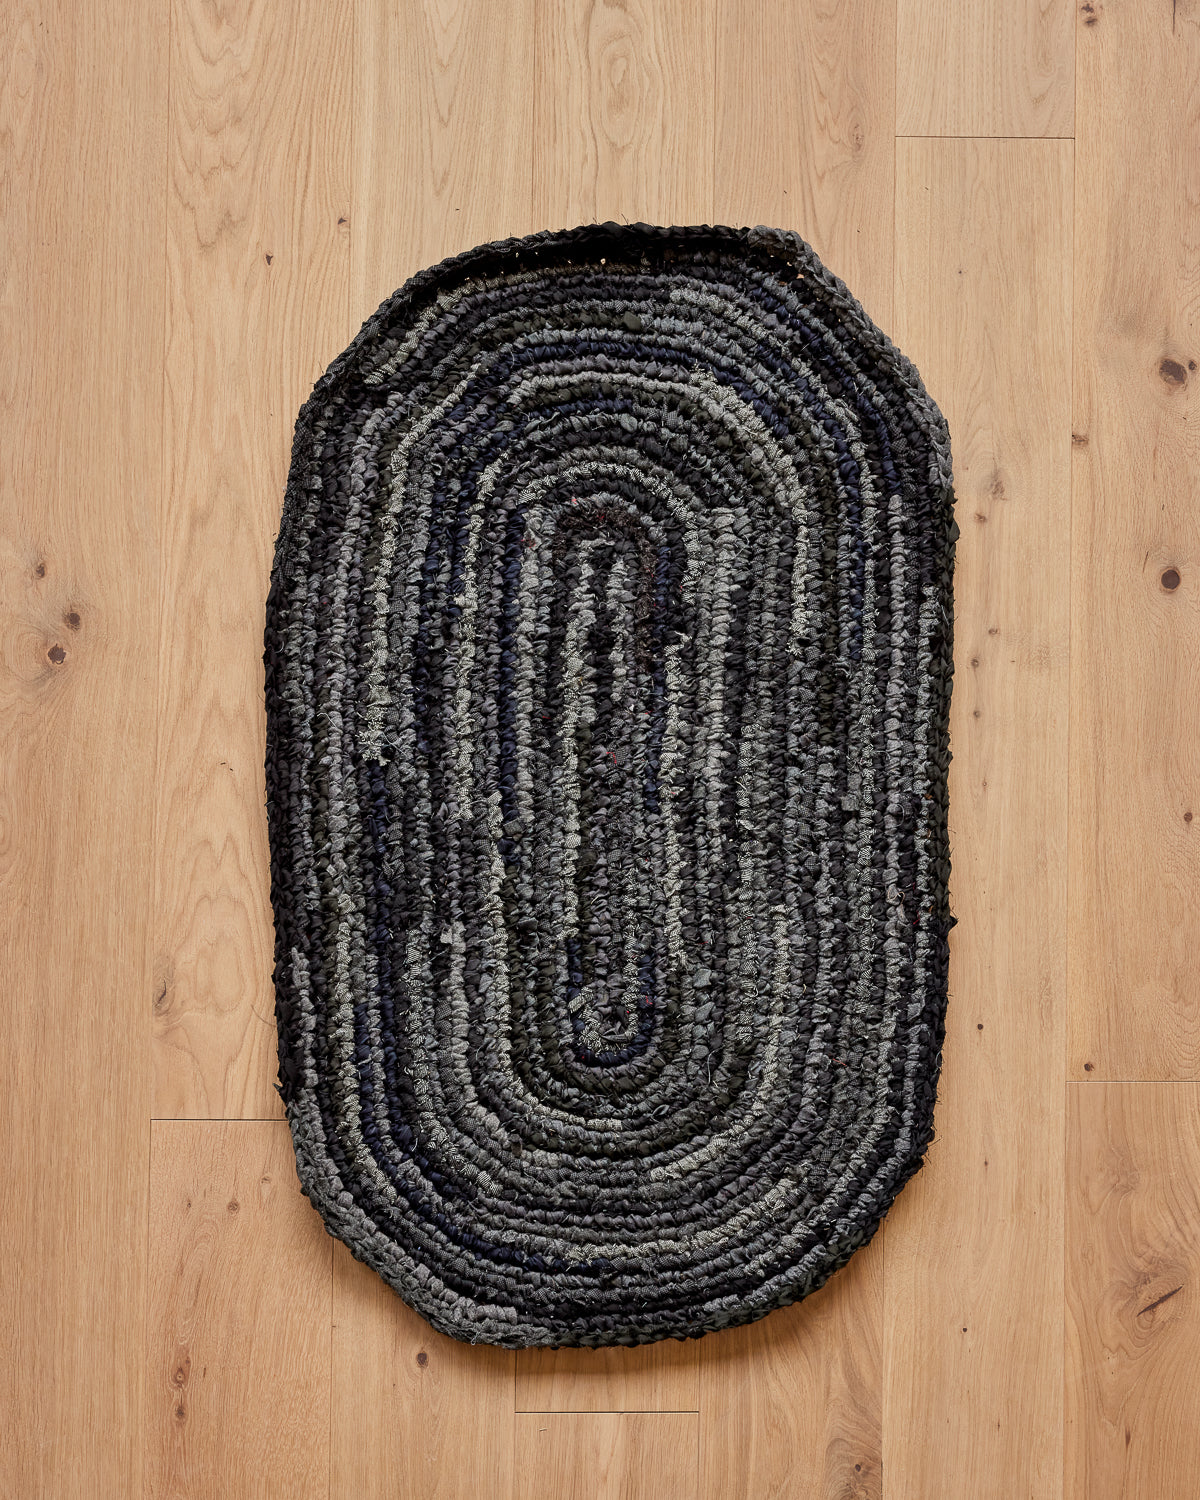 Olly's Oval Rug - Black and Gray